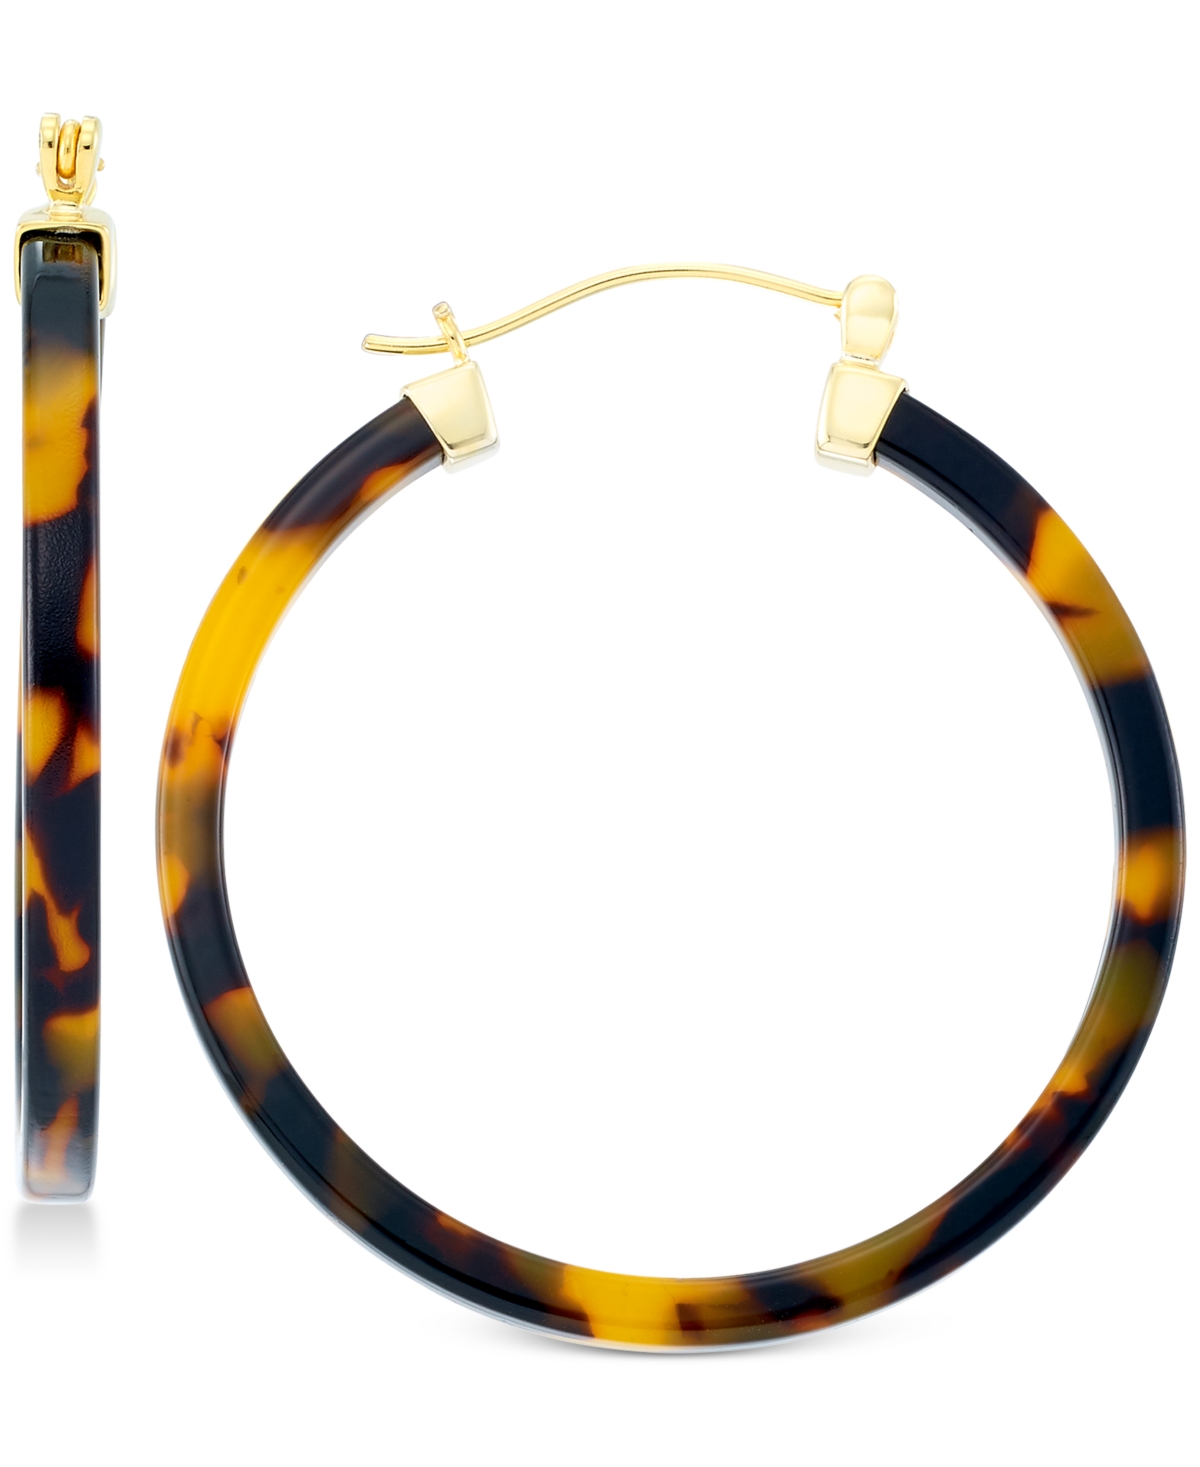 Tortoiseshell-Look Lucite Hoop Earrings in 18k Gold over Sterling Silver - Gold over Silver